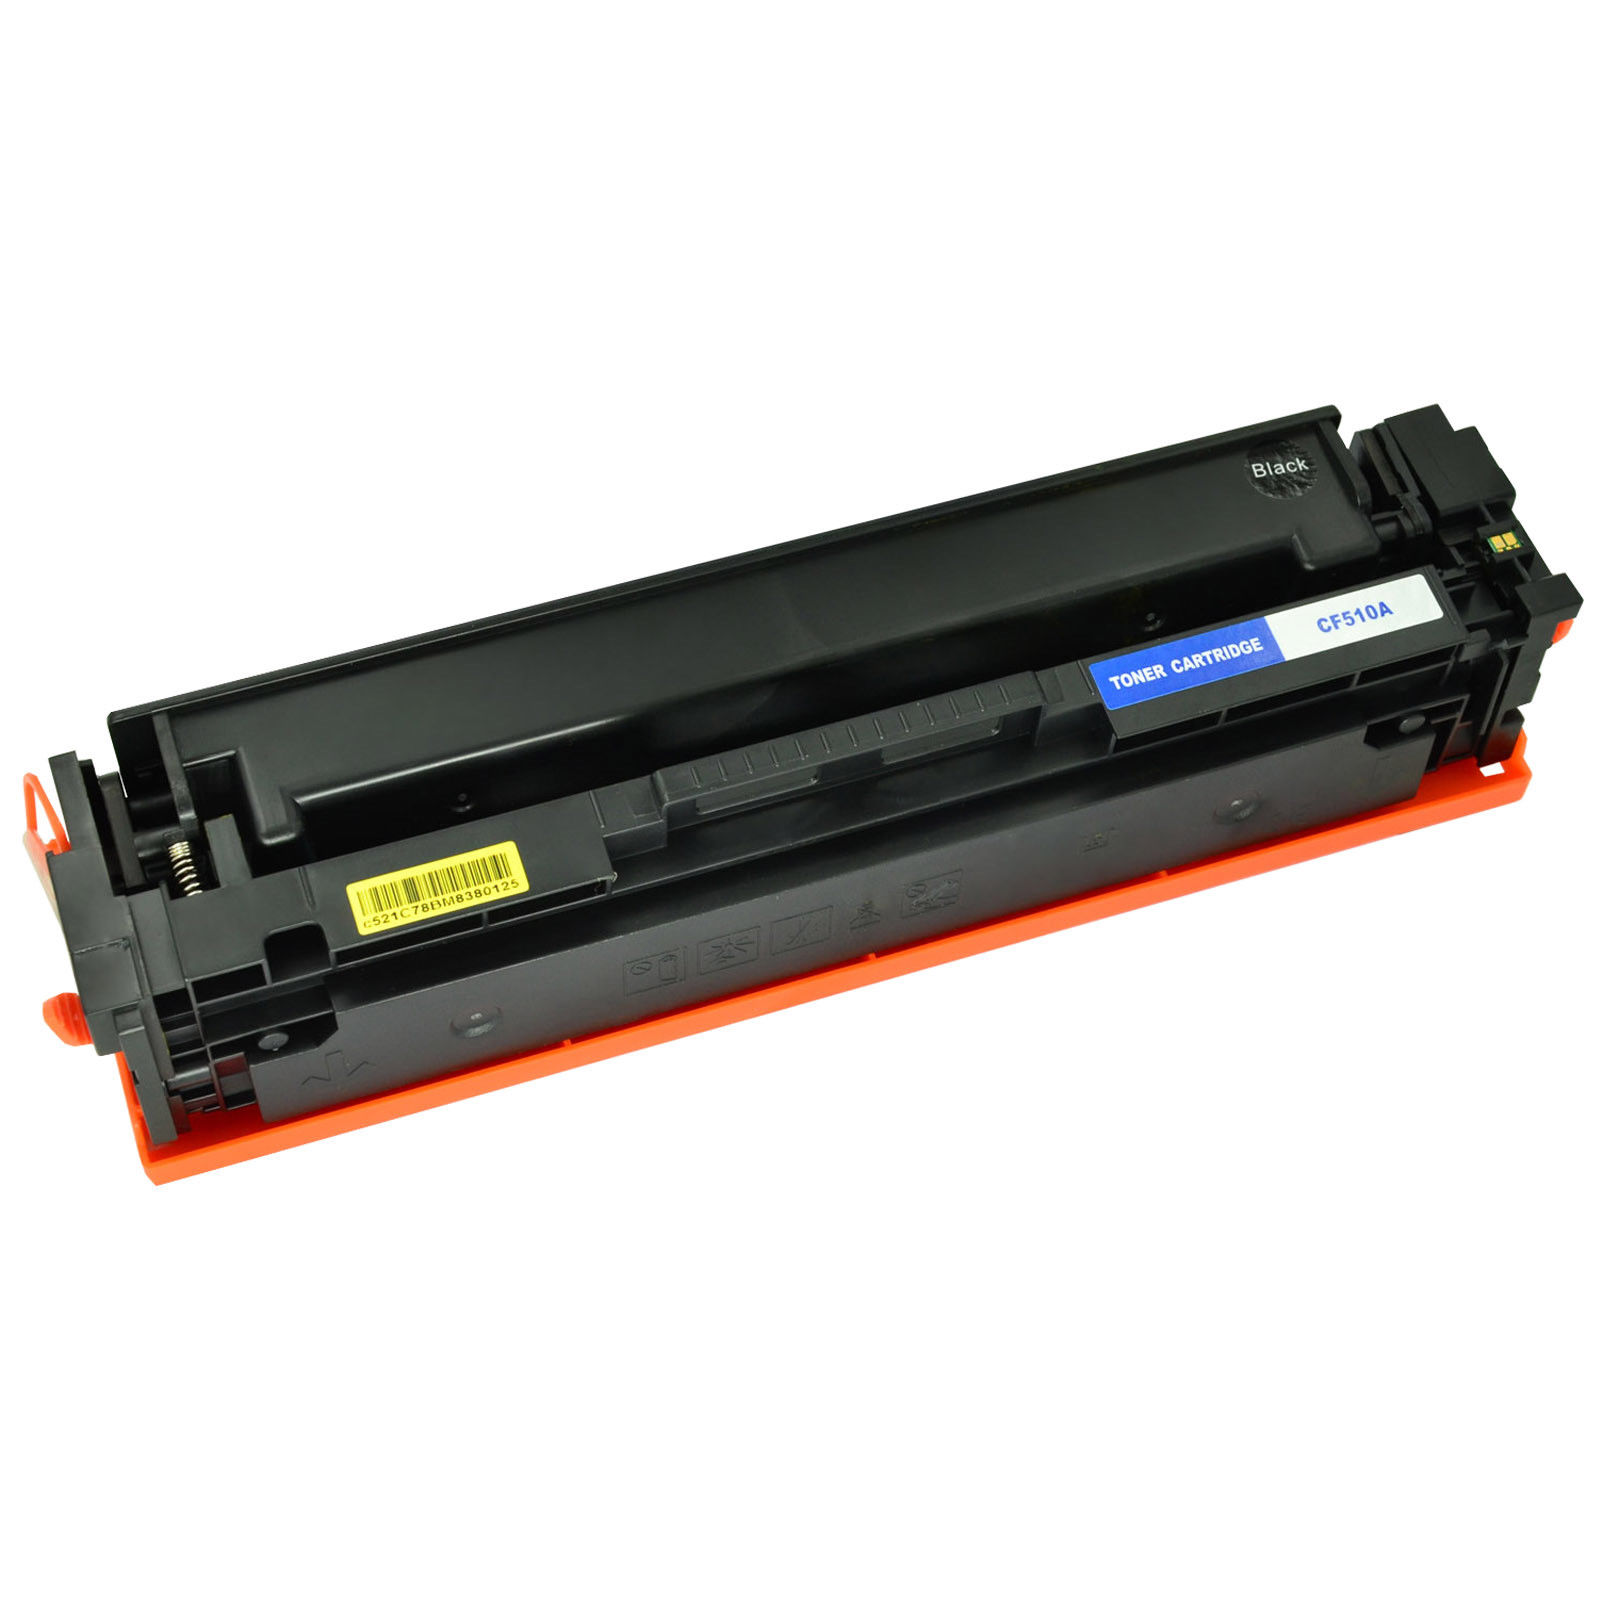 HP 204A CF510A BLACK Toner Cartridge M180nw M18fw M154a M154nw